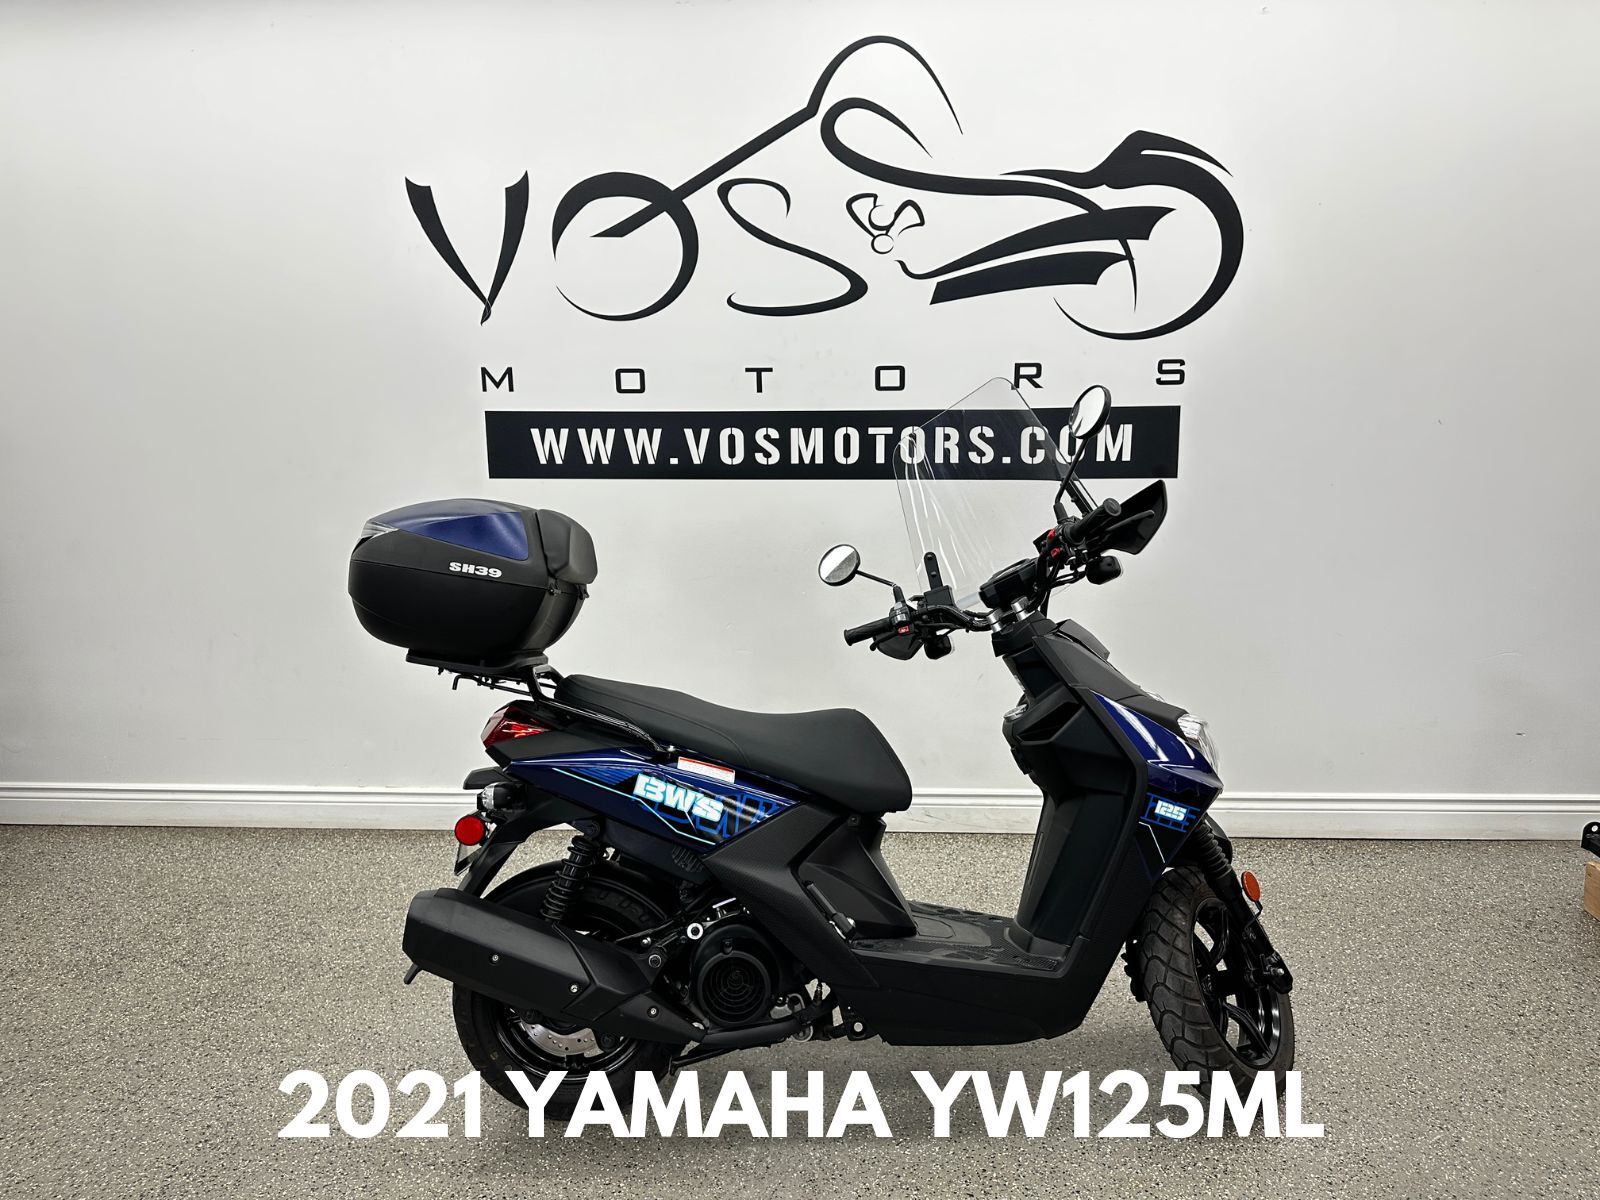 2021 Yamaha YW125ML BWs 125 - V5686NP - -No Payments for 1 Year**